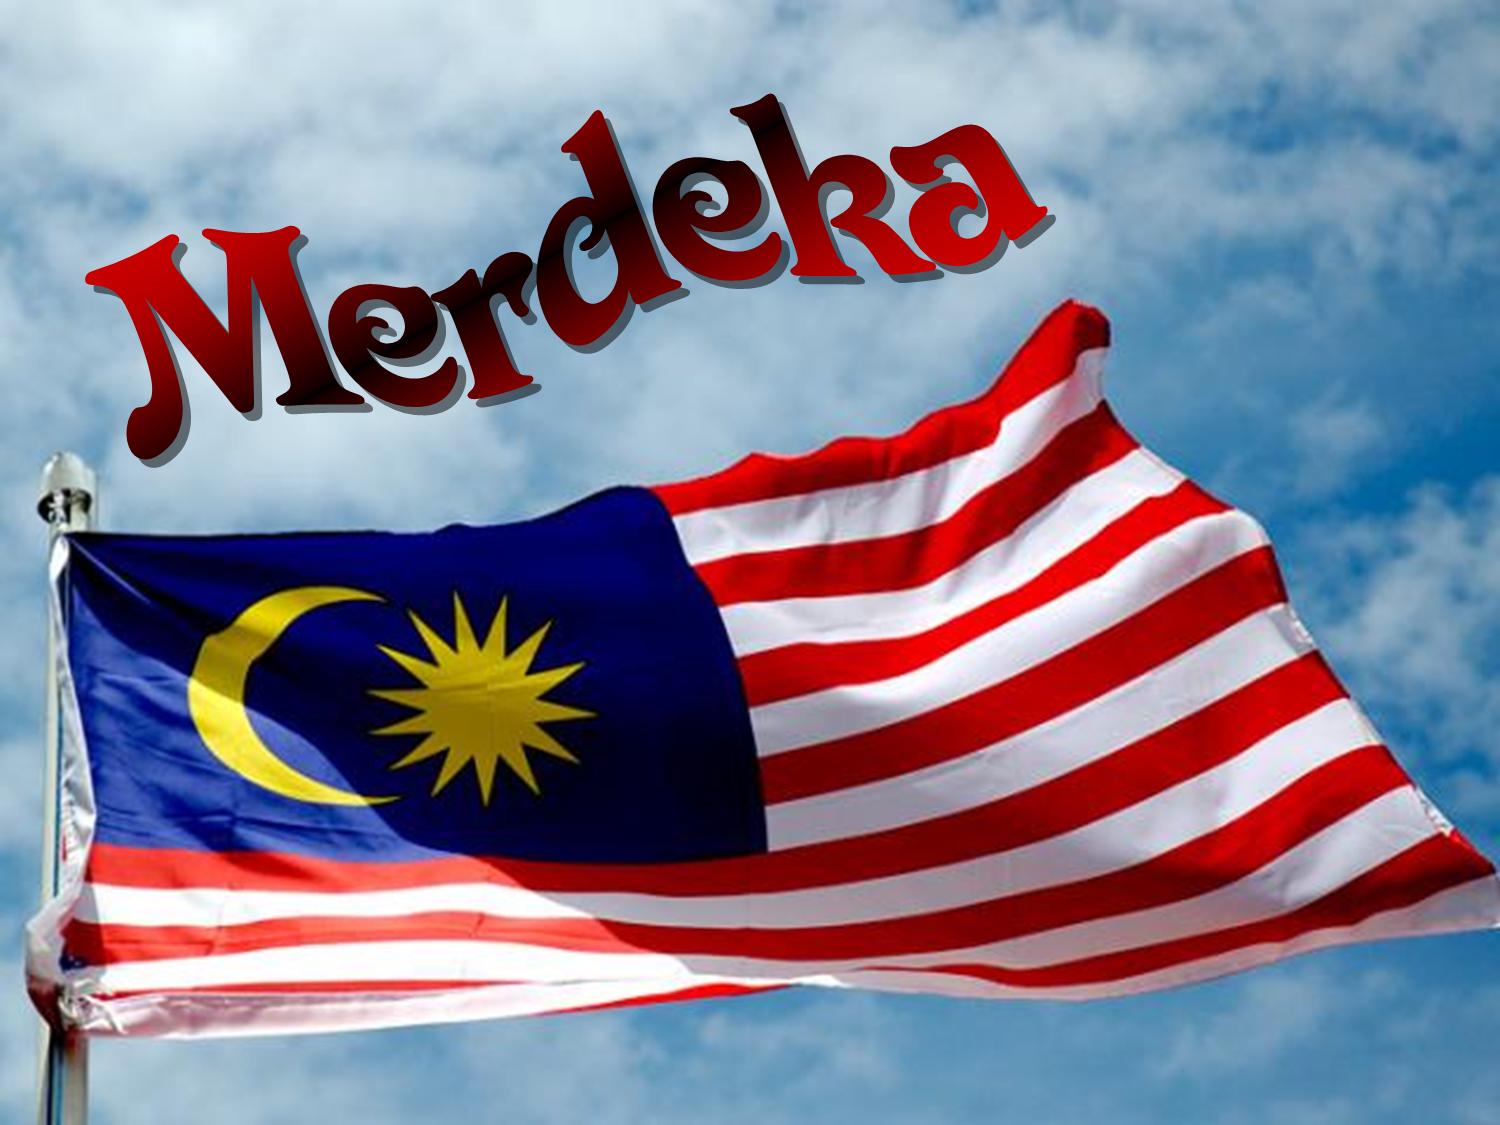 Malaysia 31st August Image 2016 Friendship Day Status 2020